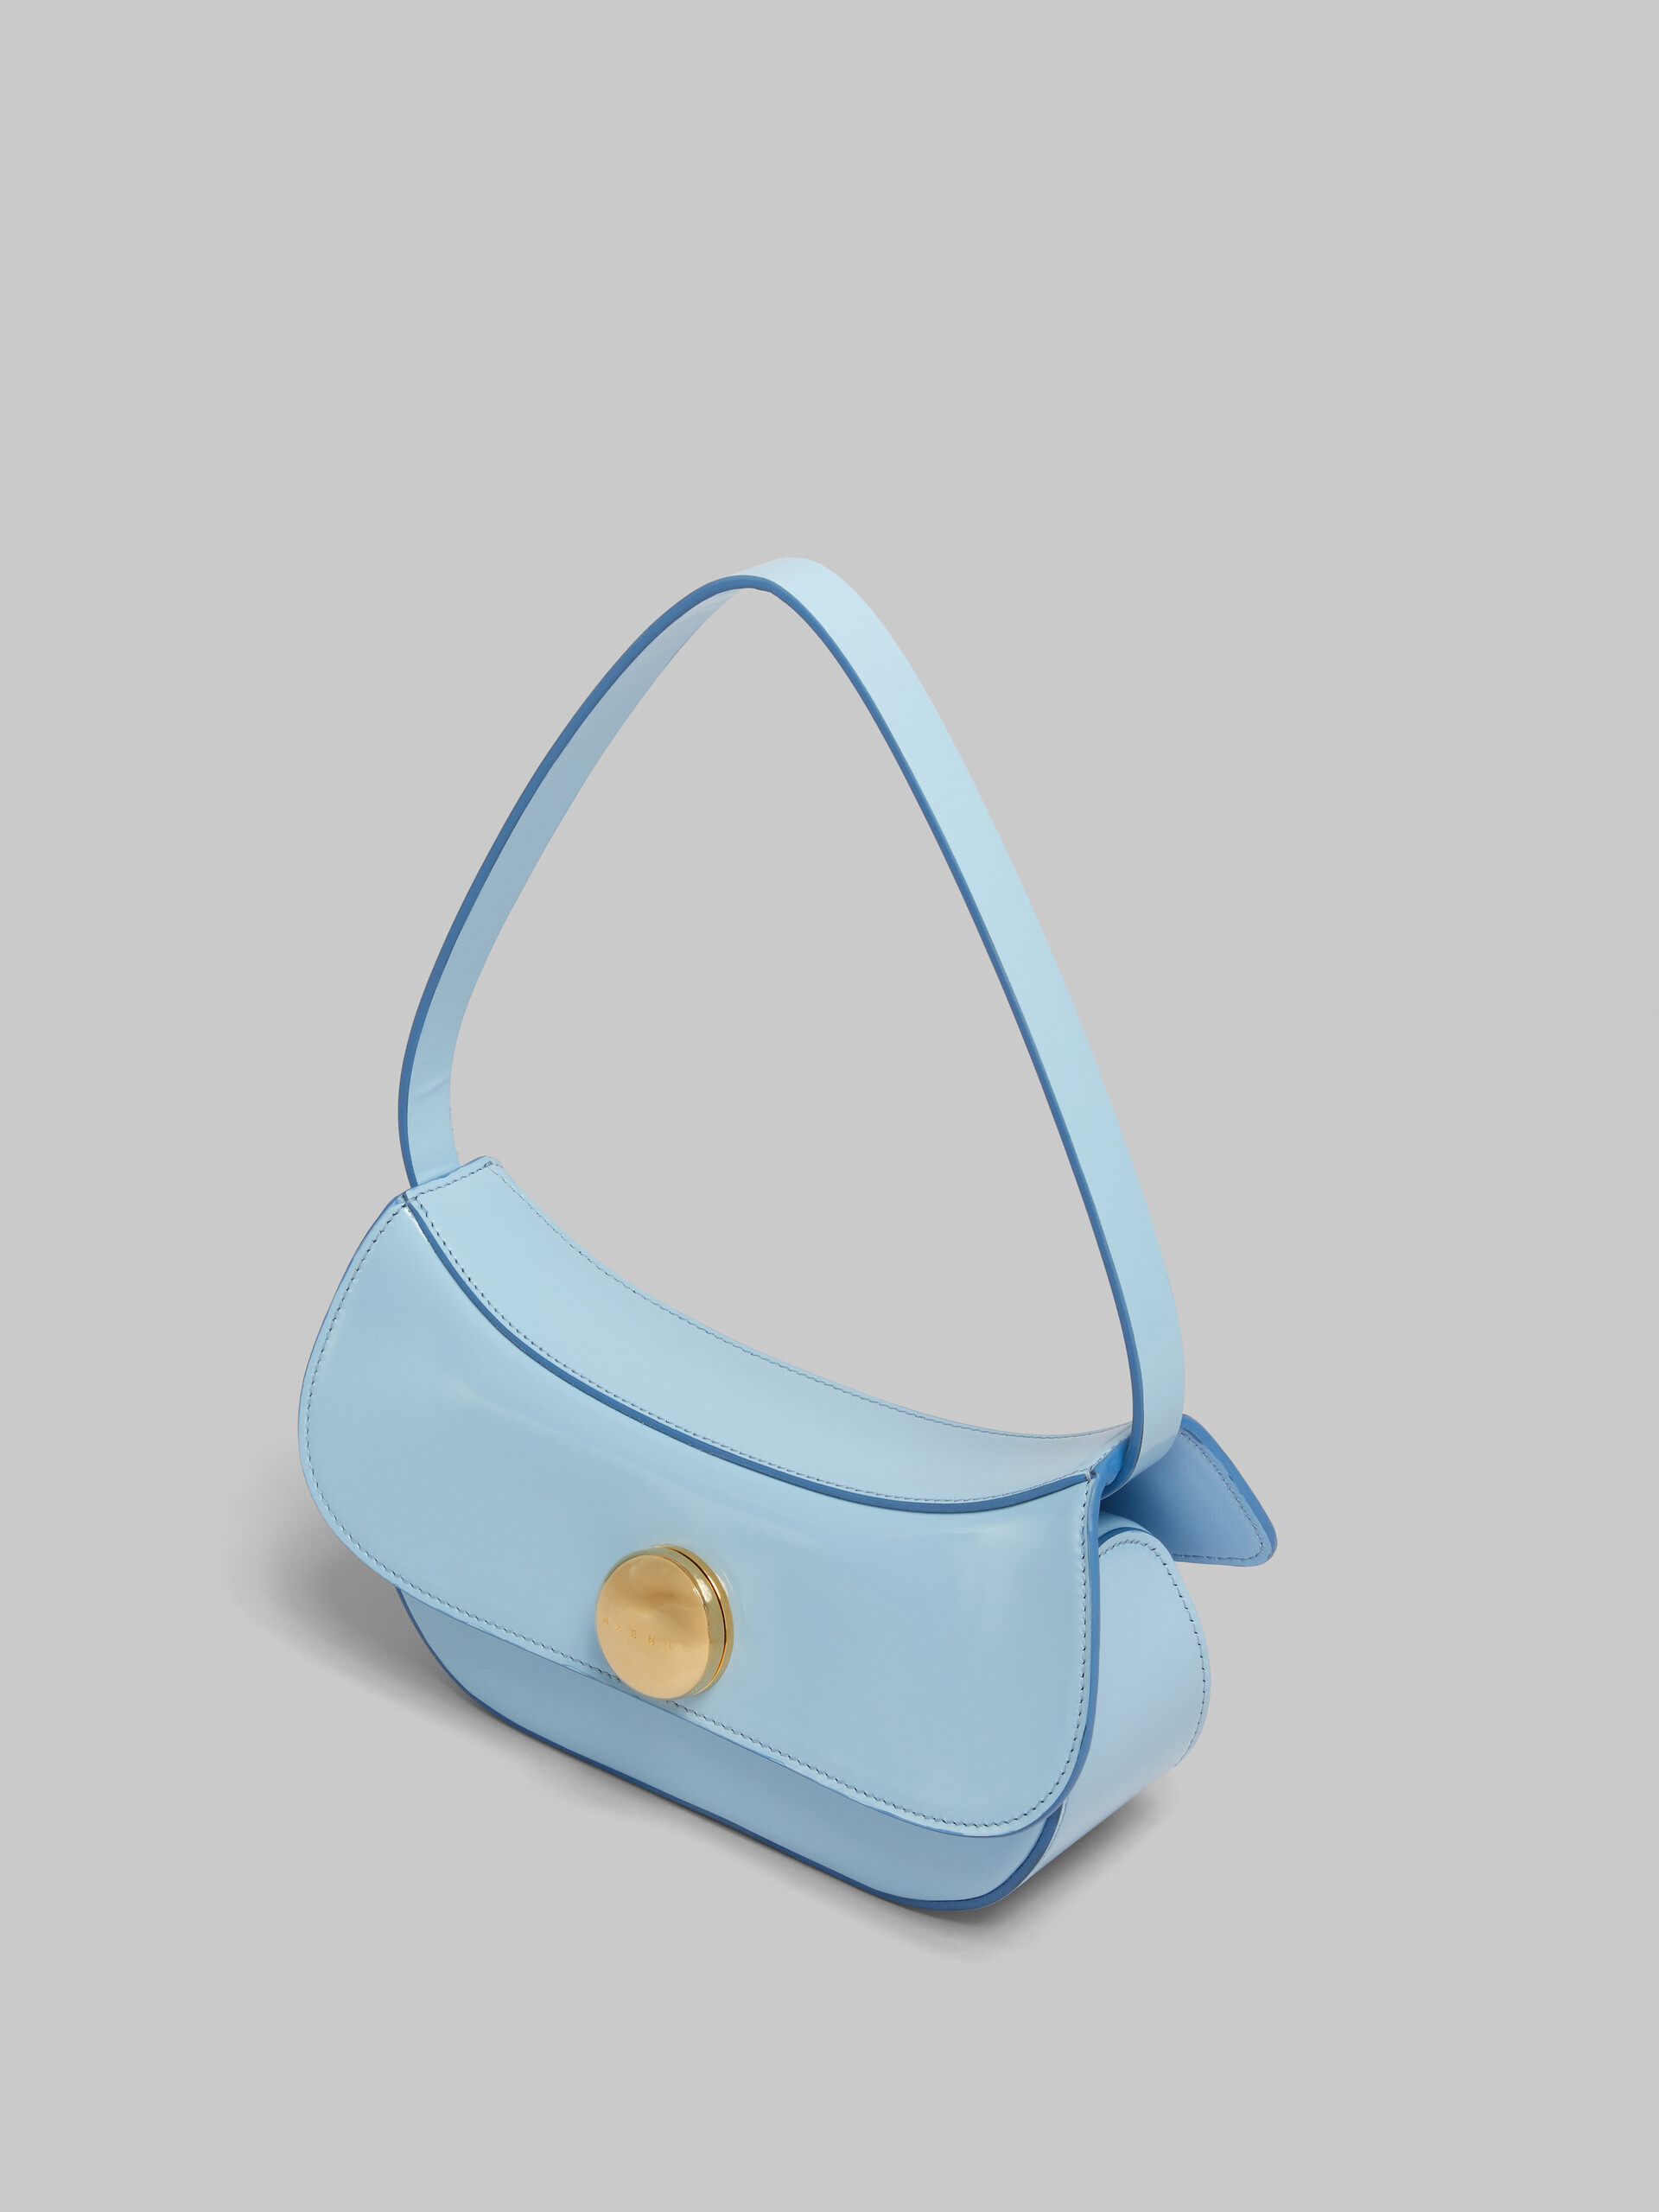 Blue leather Butterfly small hobo bag - Shoulder Bags - Image 5